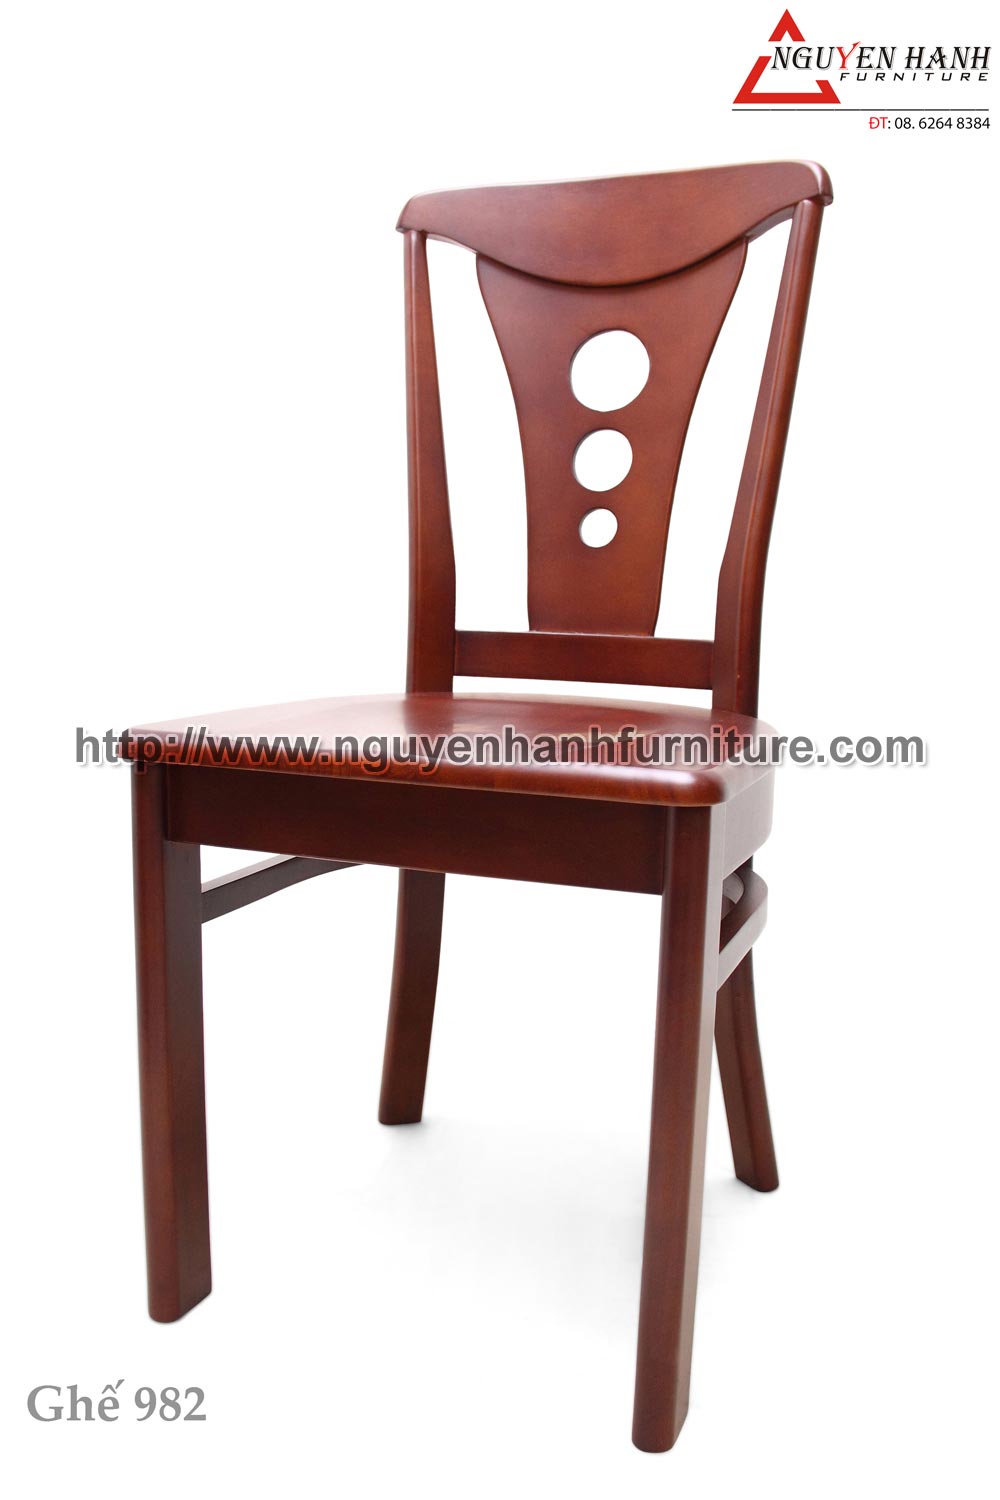 Name product: 982 chair- Dimensions:  - Description: Wood natural rubber